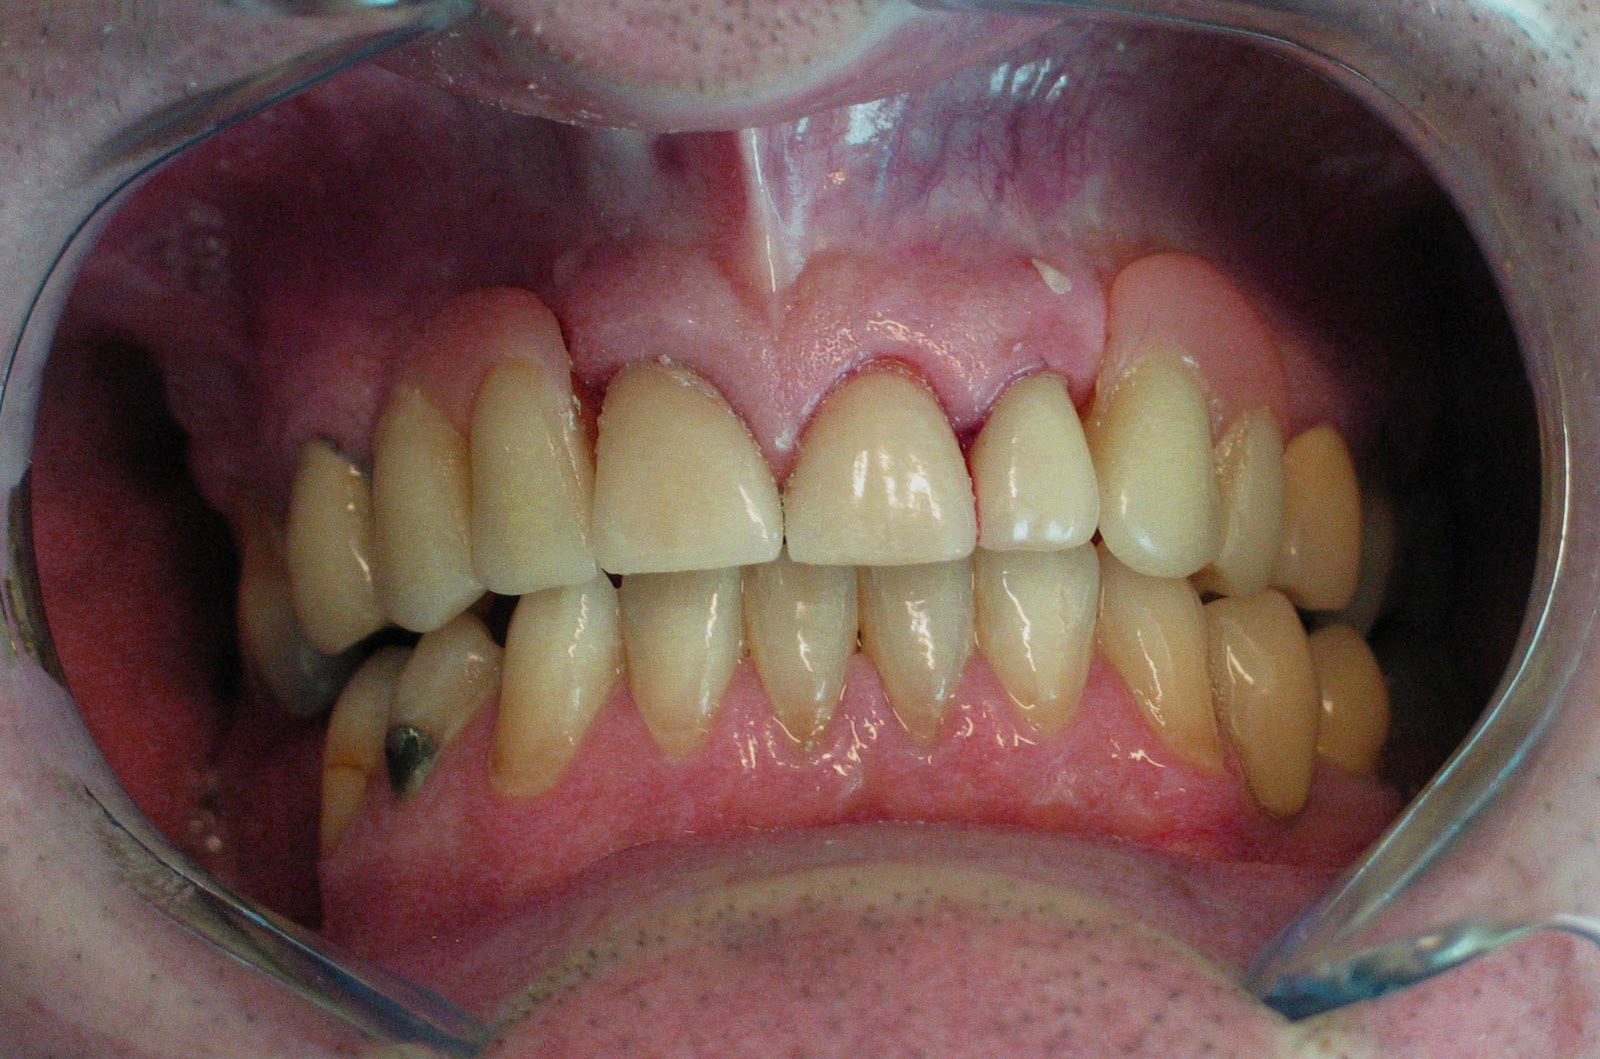 Jonathan's Blog. Life and dentistry combined!: Let me show you some of my dental work. Some ...